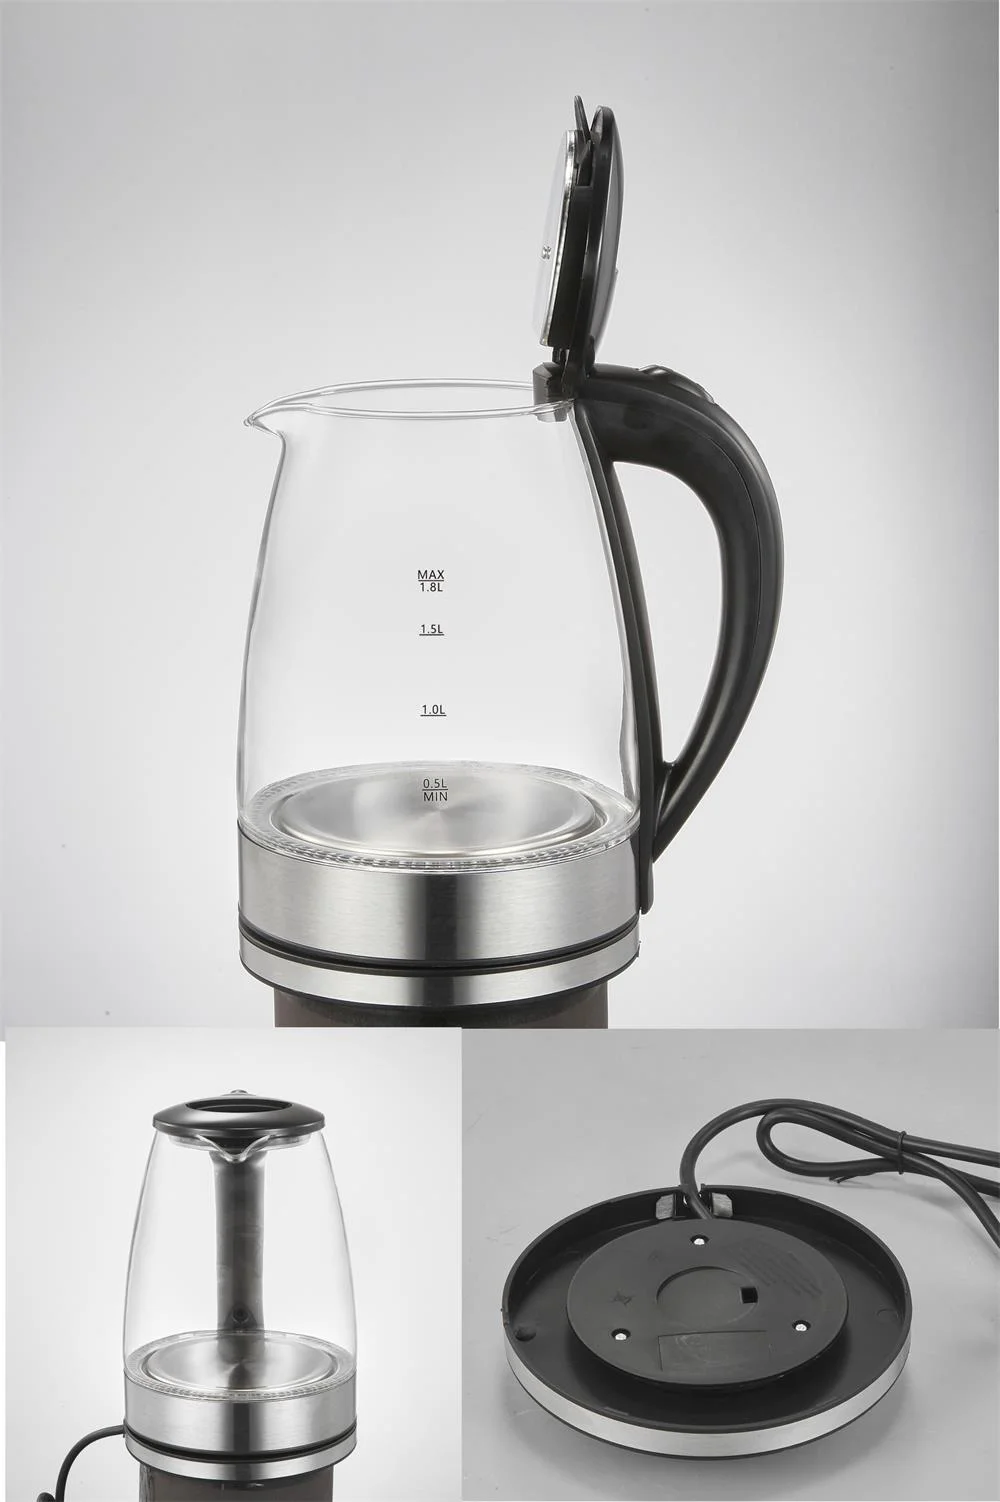 Kettle Electric Kettle Glass Kettle Hot Sales High Quality 1.8L OEM Box Power Packing Plug Chinese Tea Maker Water Boiler